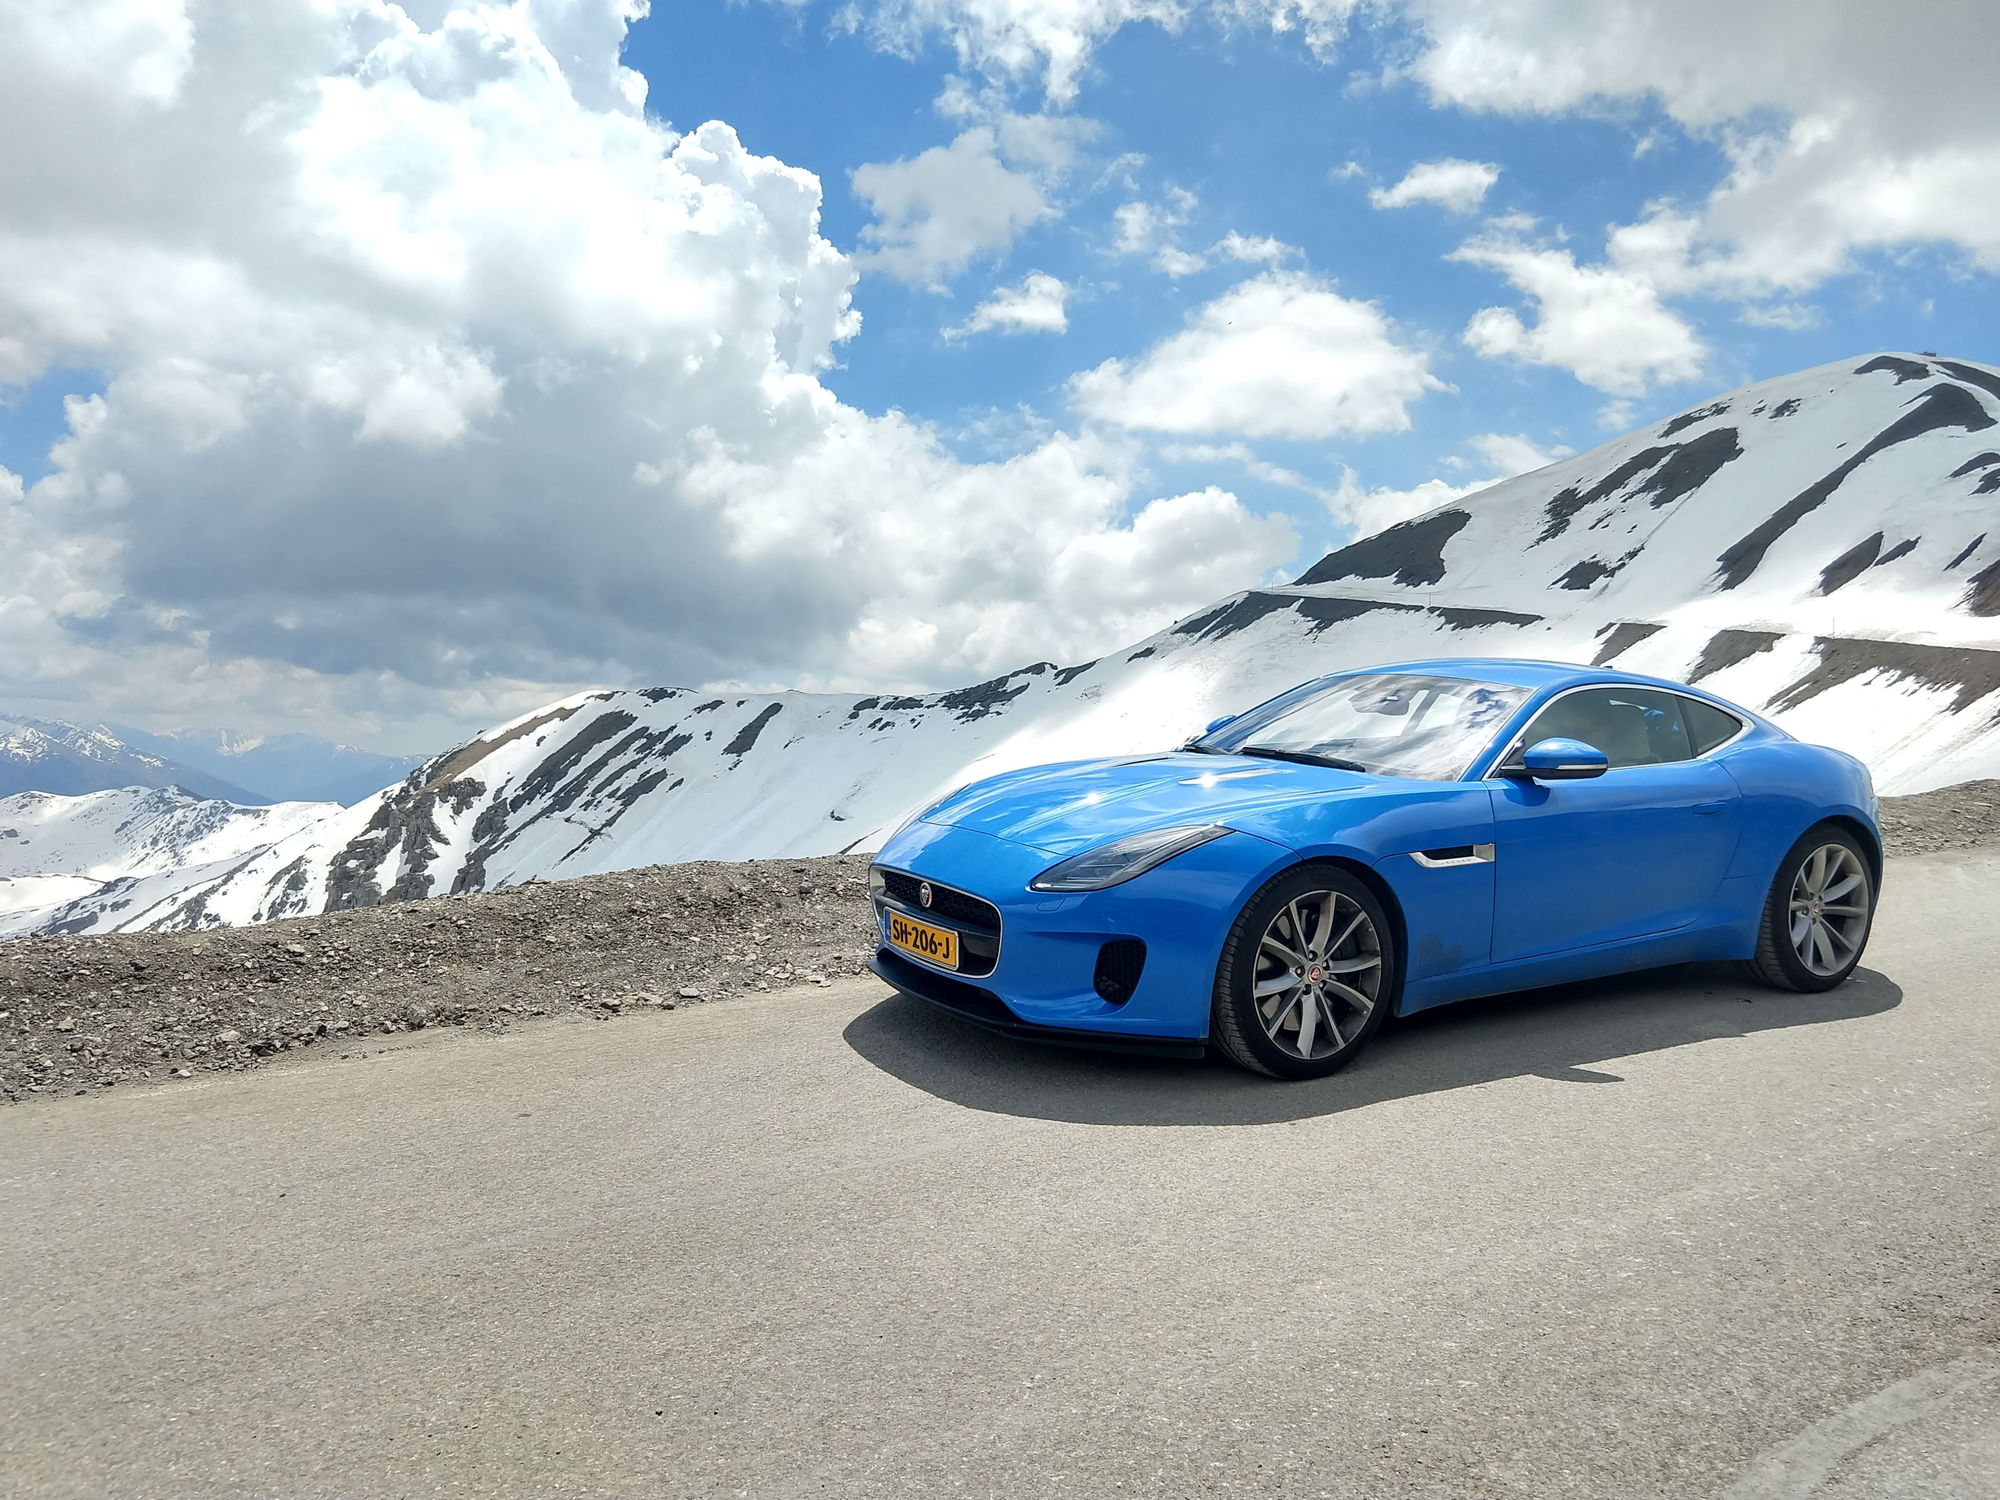 Official Jaguar F-Type Picture Post Thread - Page 126 ...